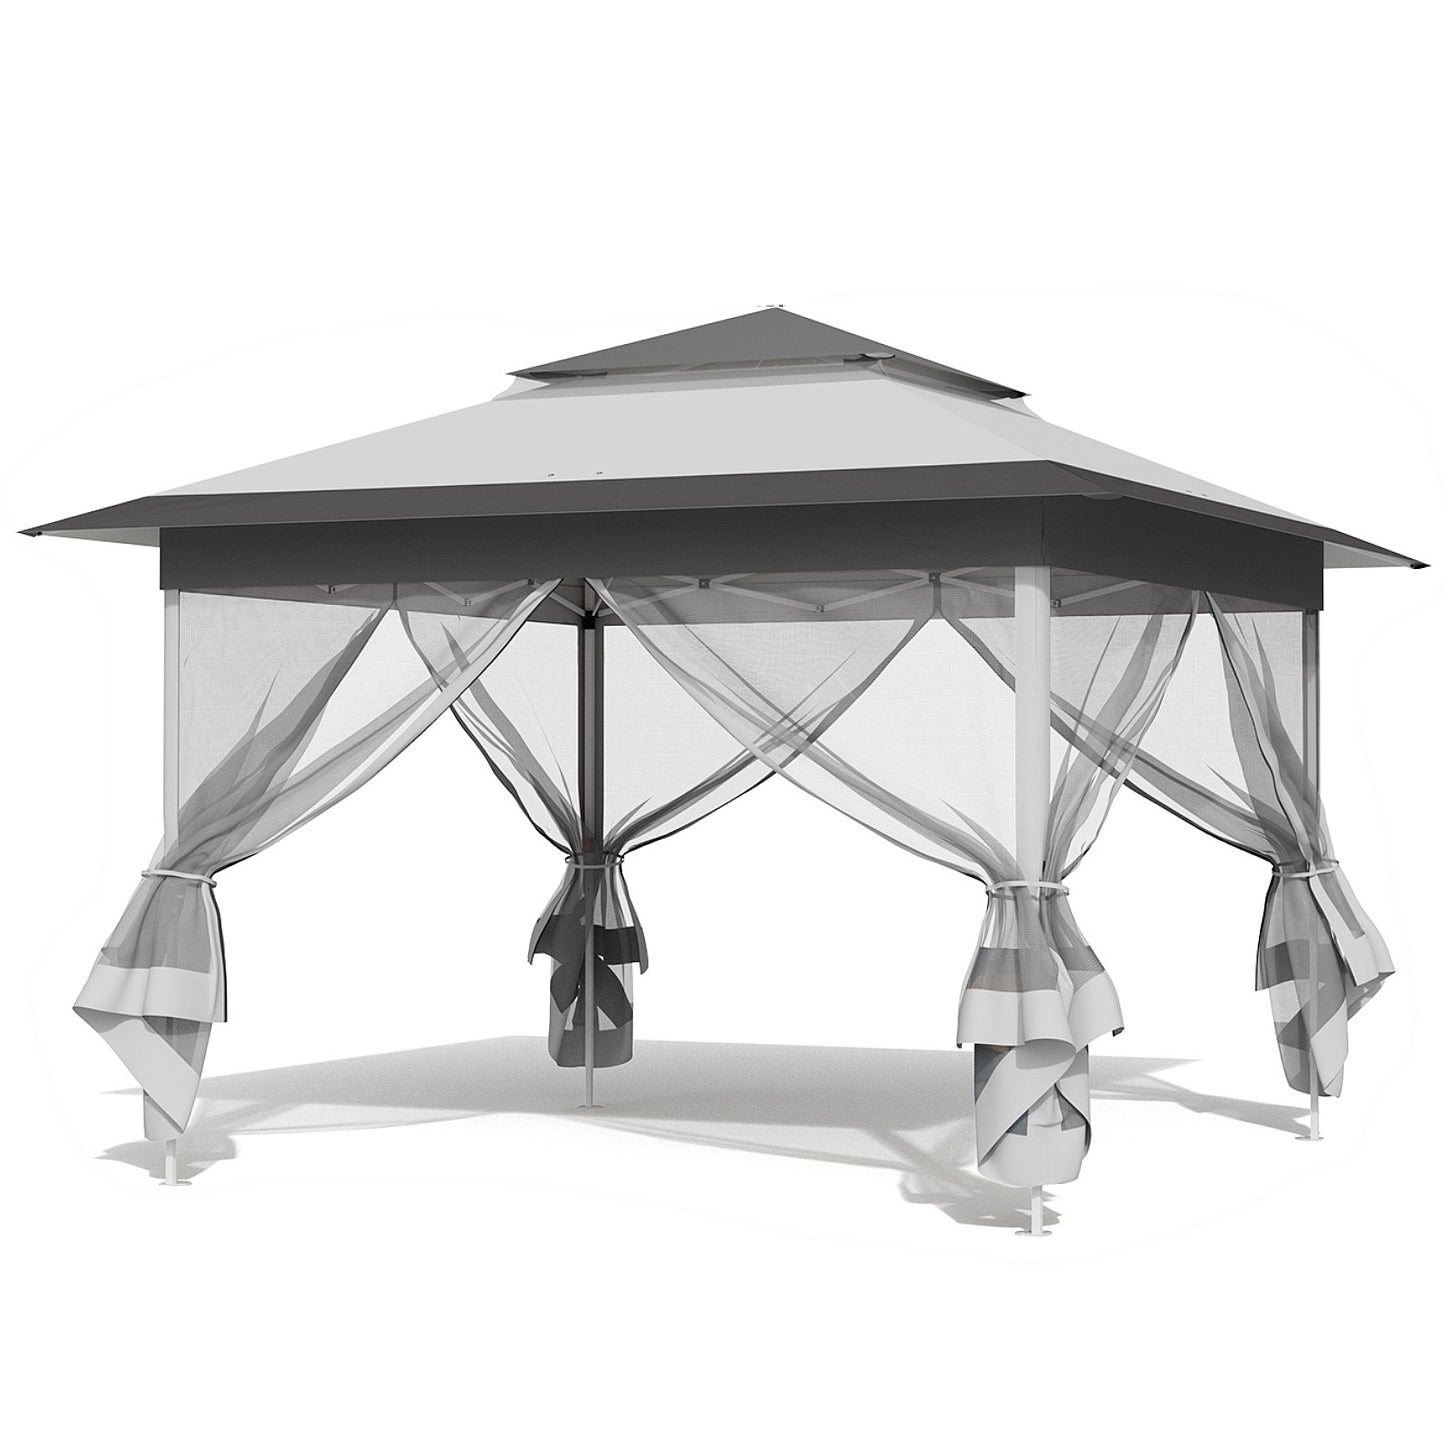 Arlopu 11'x11' Pop Up Gazebo, Outdoor Instant Canopy Tent with 4 Netting Sidewall & Auto Extending Eave, Patio Gazebos Shelter w/Mesh Wall, Center Lock, Wheeled Bag for Garden, Yard, Party, Deck